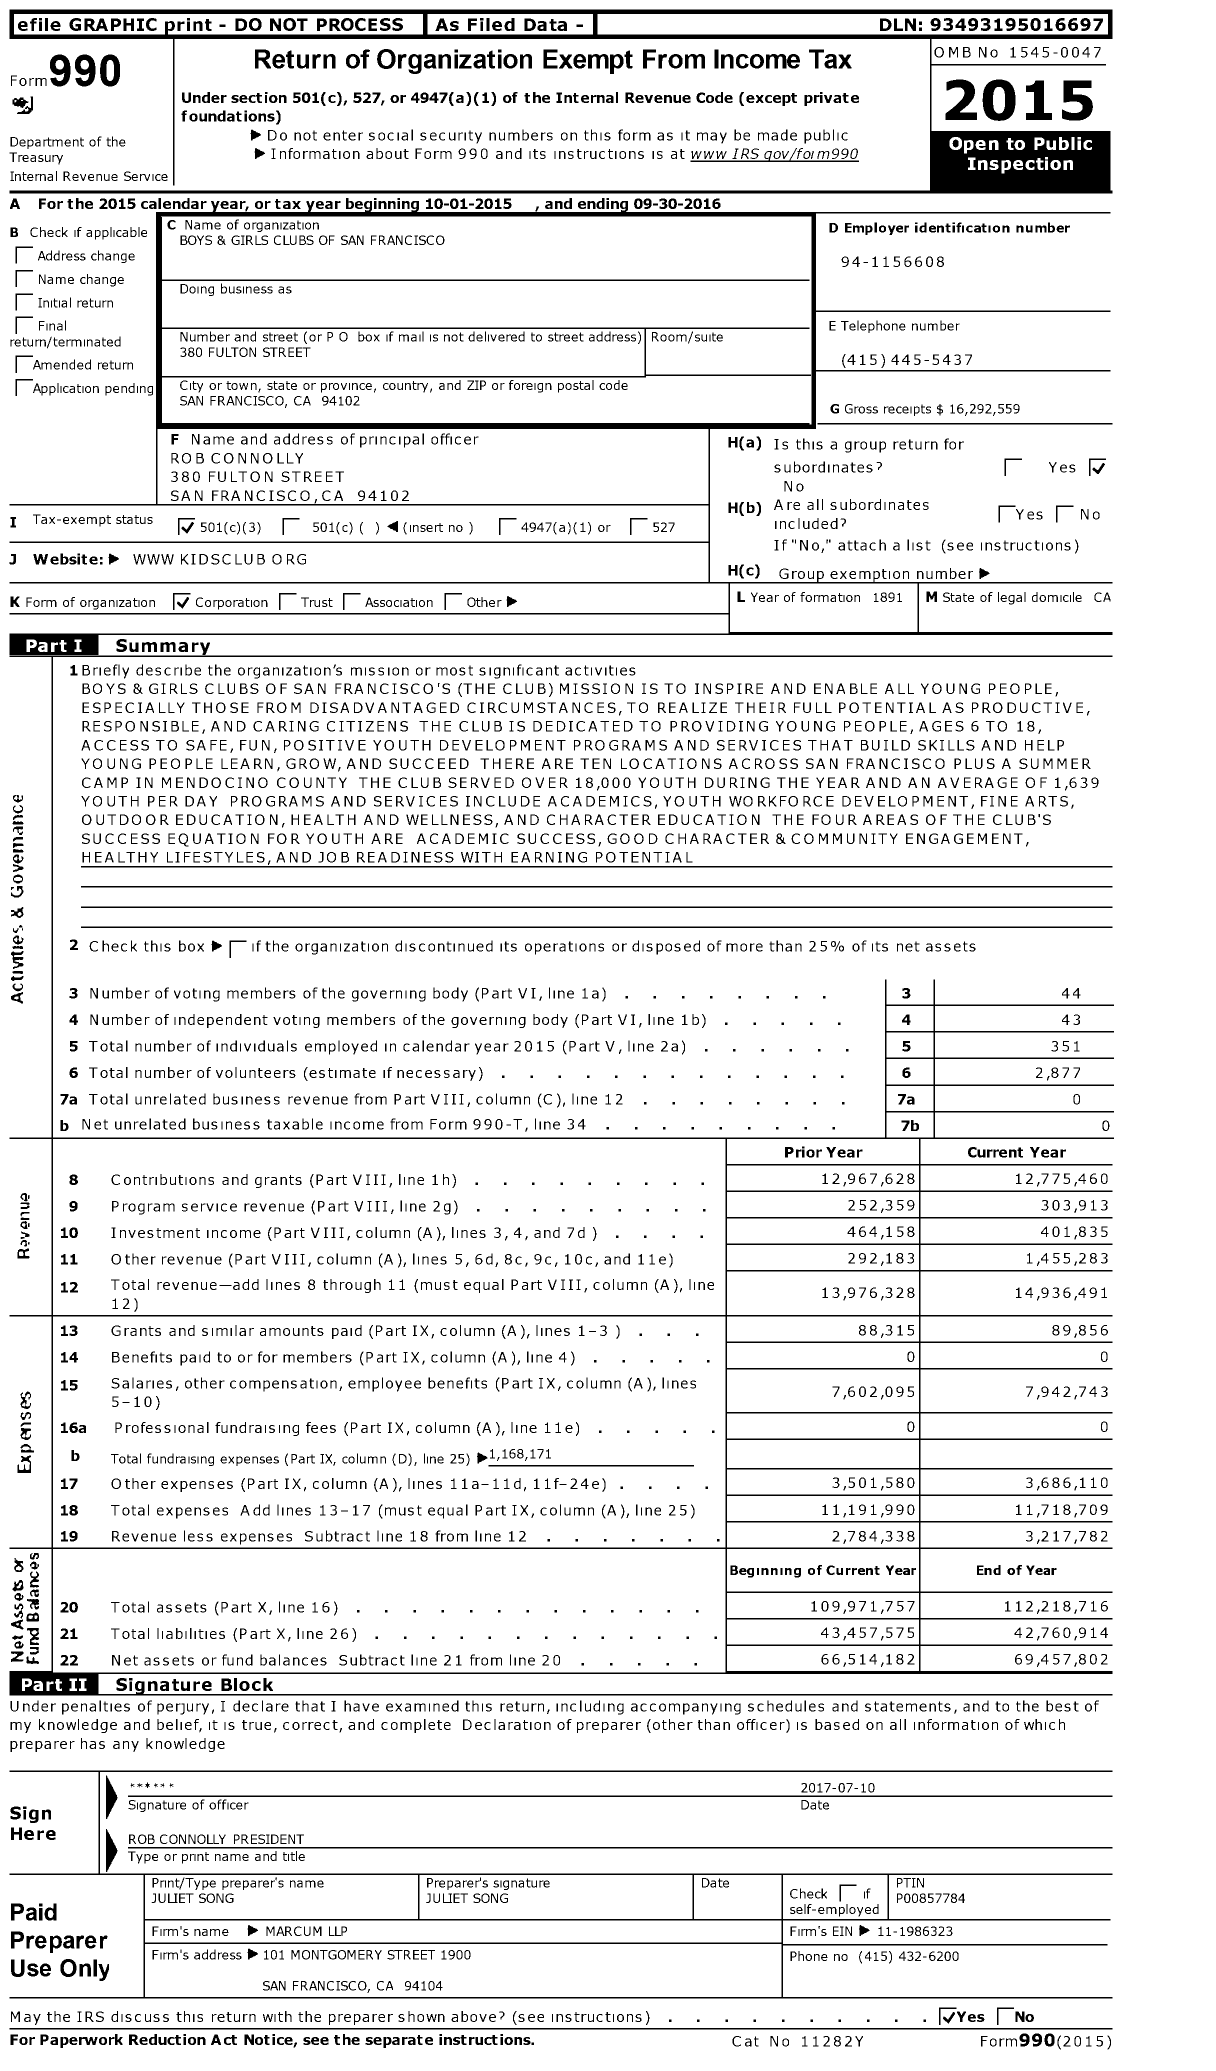 Image of first page of 2015 Form 990 for Boys & Girls Clubs of San Francisco (BGCSF)